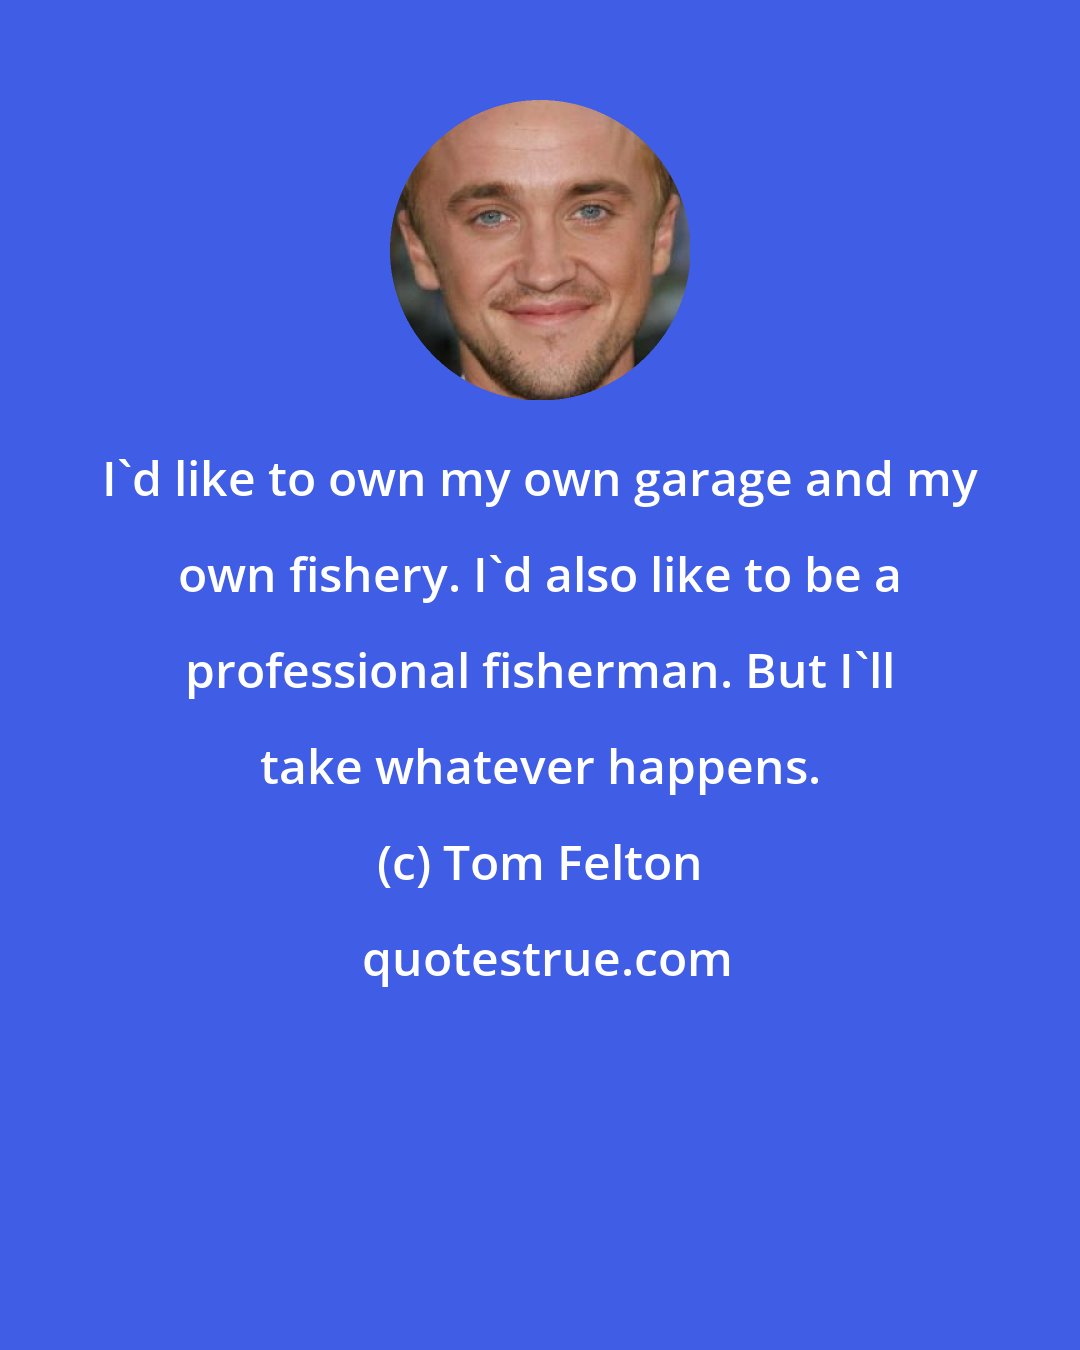 Tom Felton: I'd like to own my own garage and my own fishery. I'd also like to be a professional fisherman. But I'll take whatever happens.